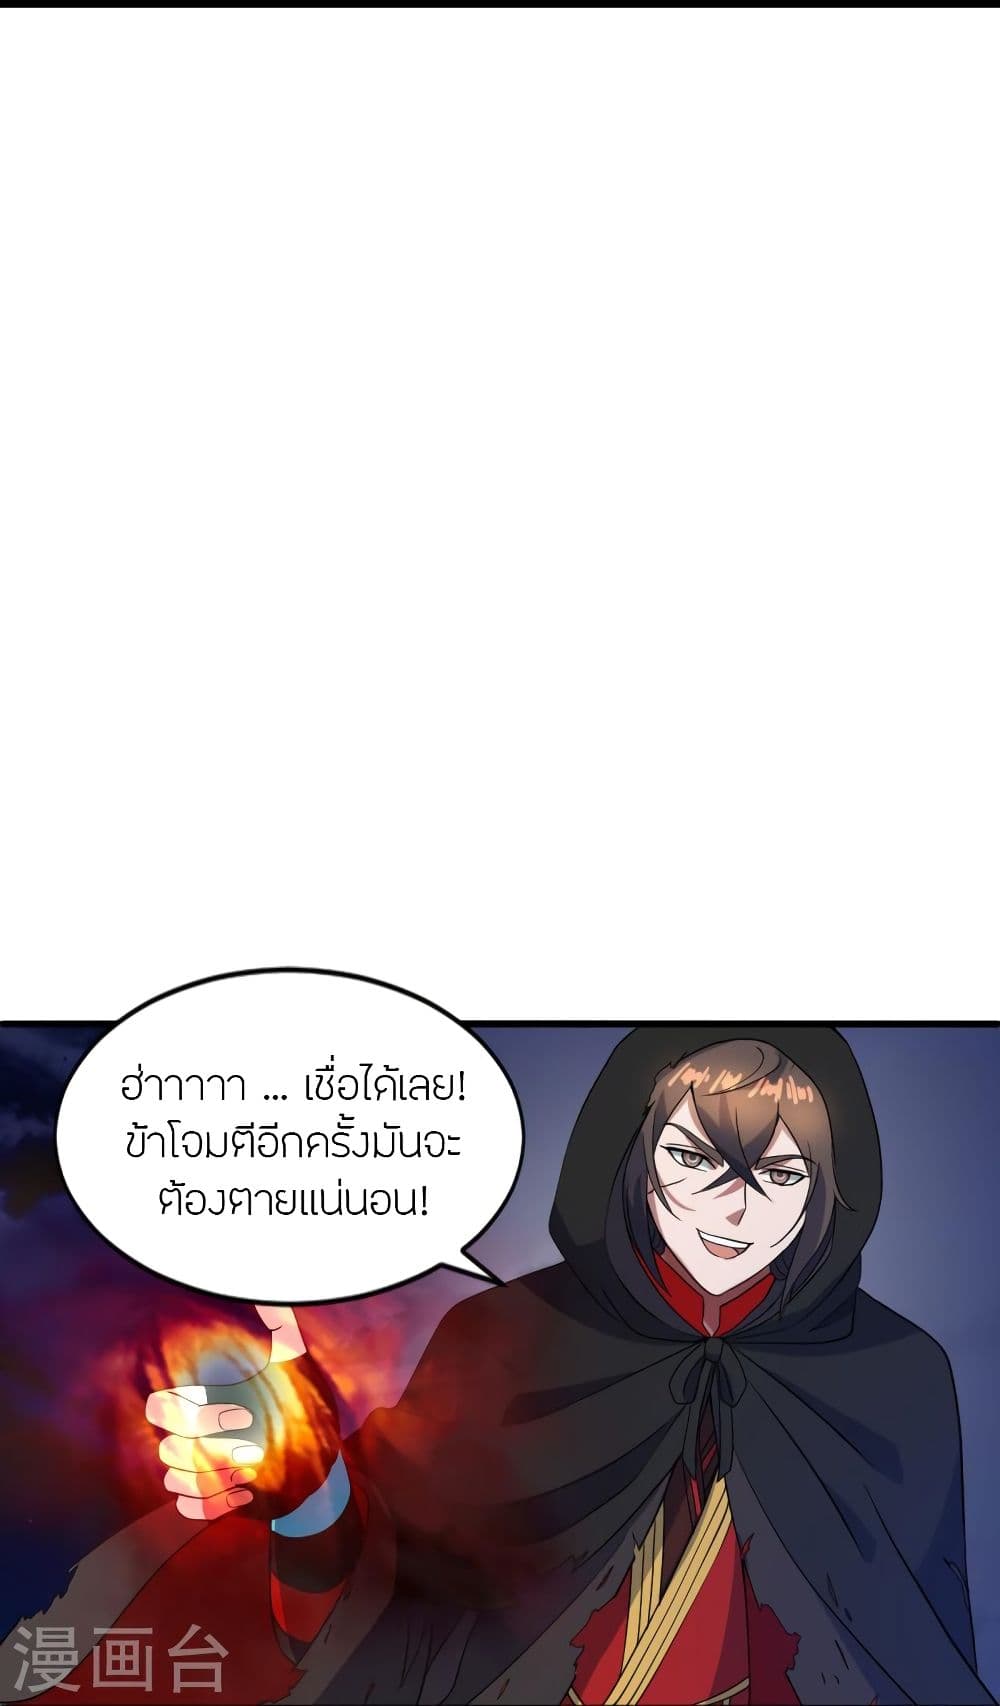 Banished Disciple's Counterattack เธเธฑเธเธฃเธเธฃเธฃเธ”เธดเน€เธเธตเธขเธเธขเธธเธ—เธ 304 (66)